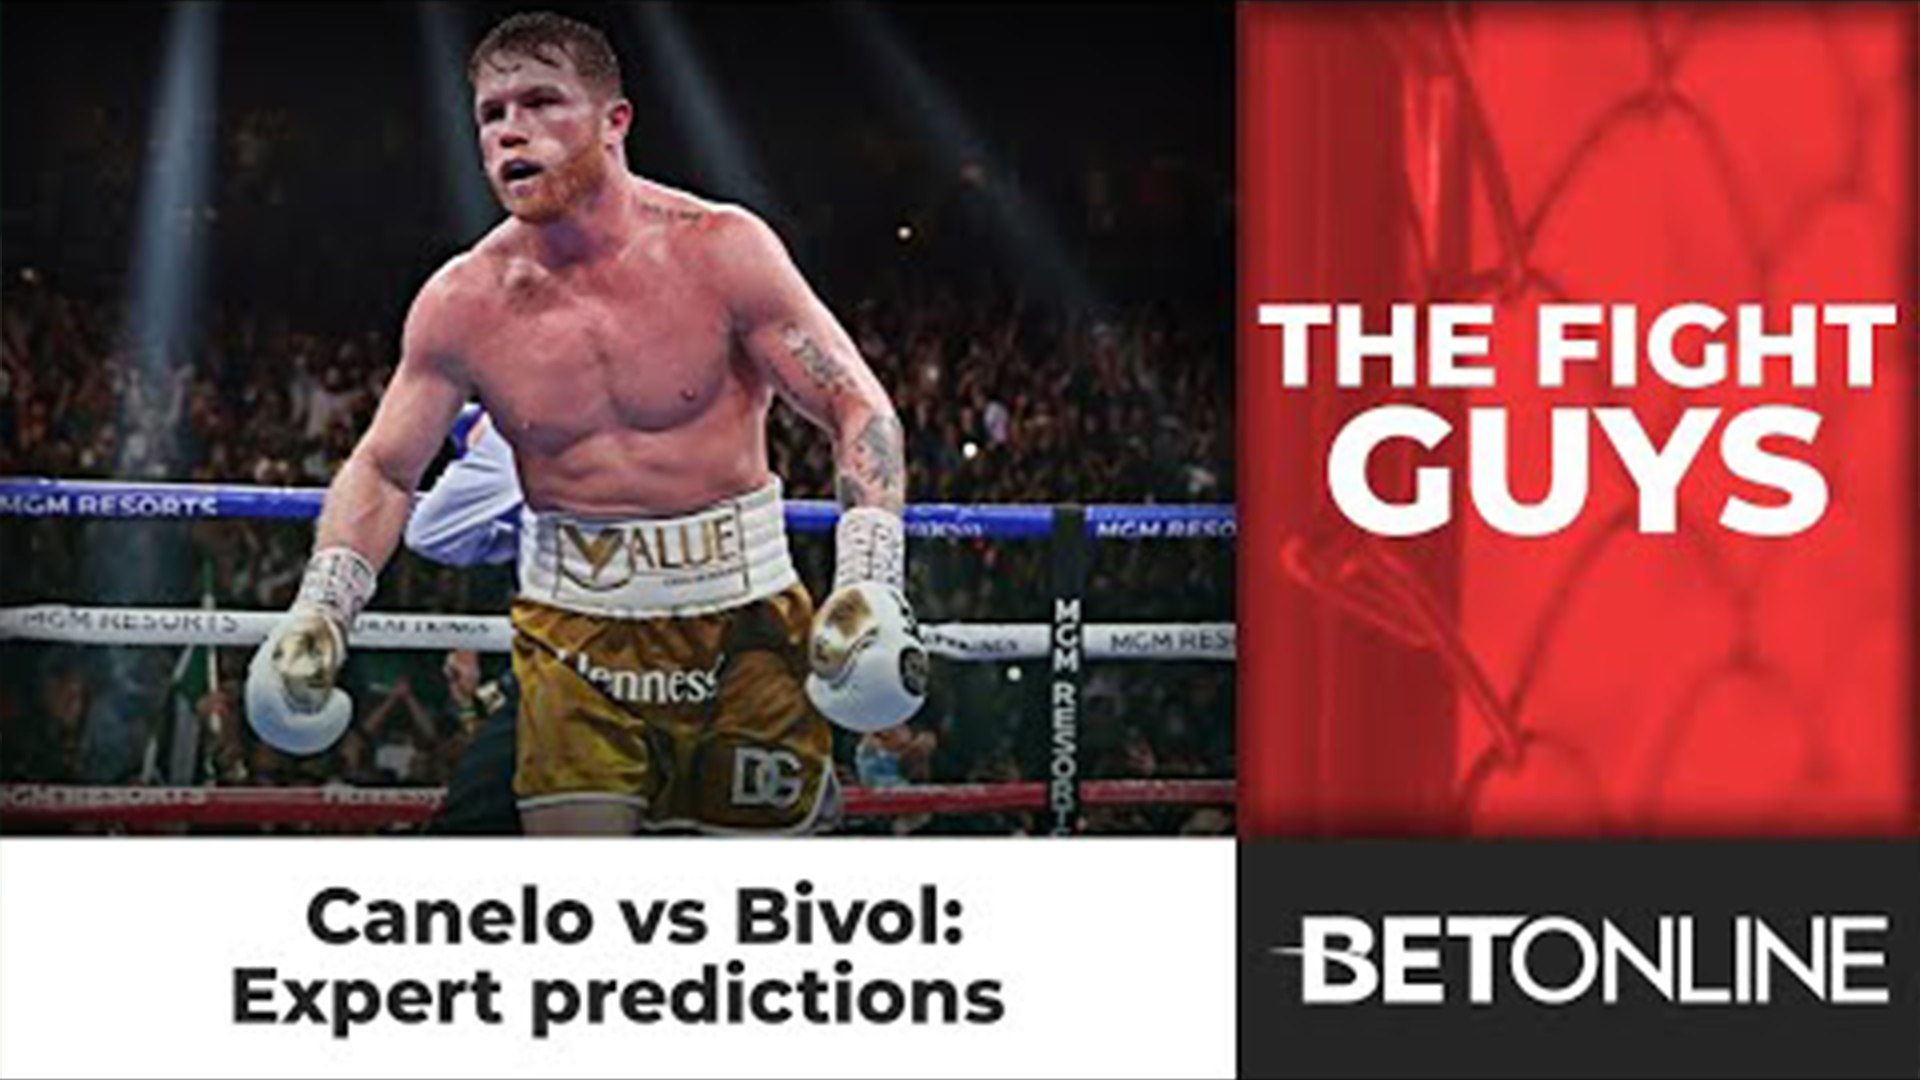 The Fight Guys Dont See Canelo Losing Against Dmitry Bivol BetOnline